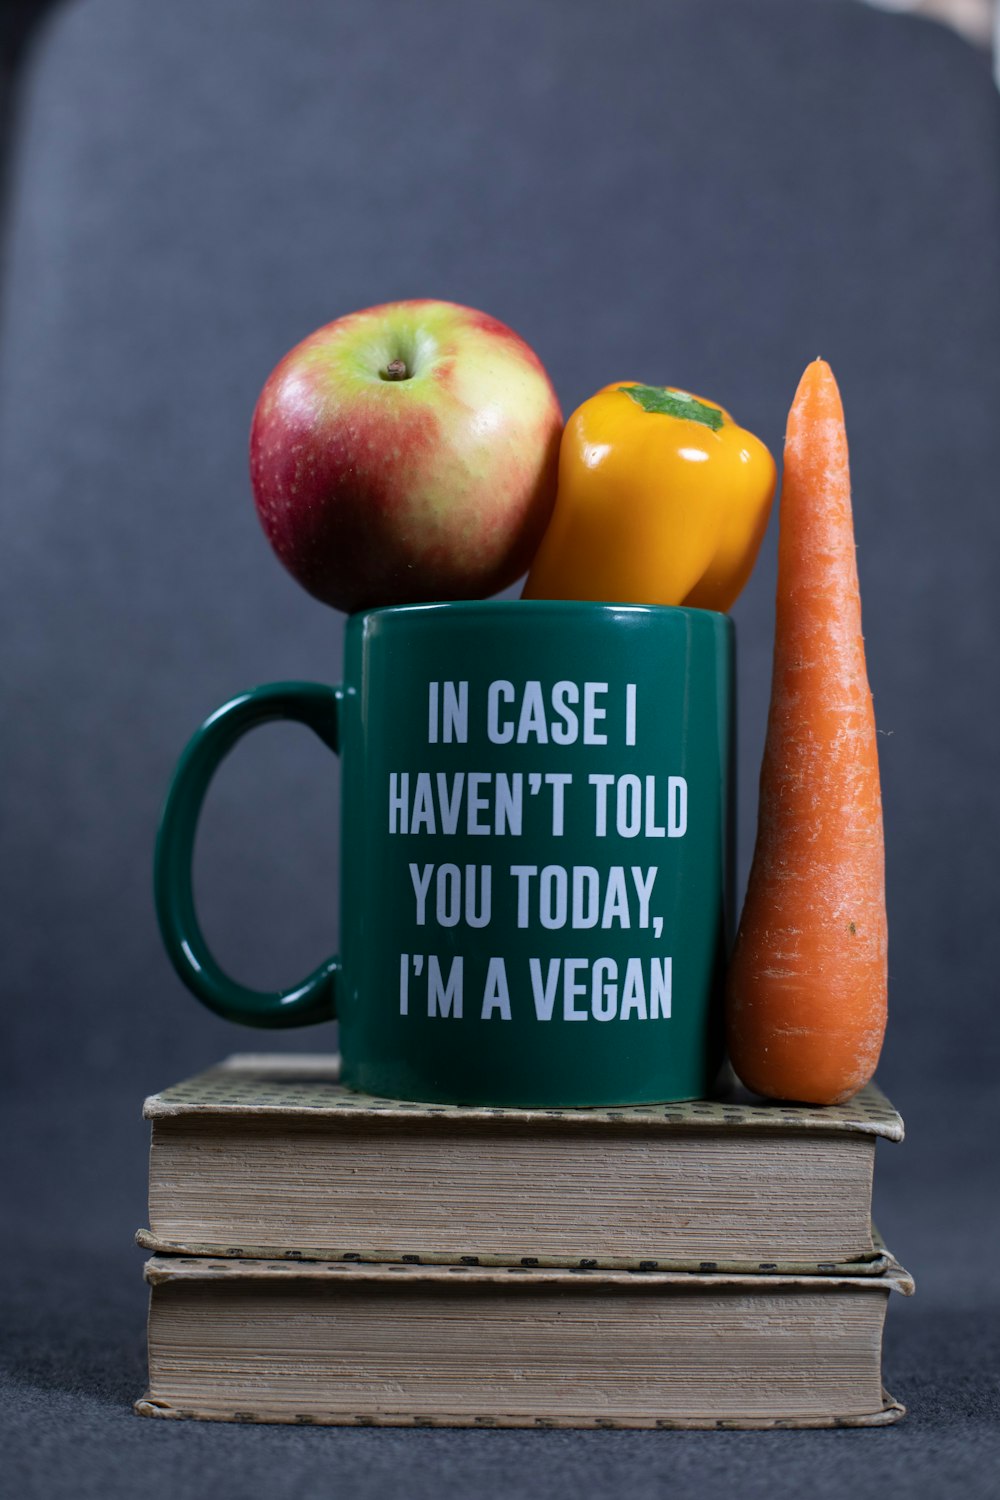 green and yellow ceramic mug with brown carrot